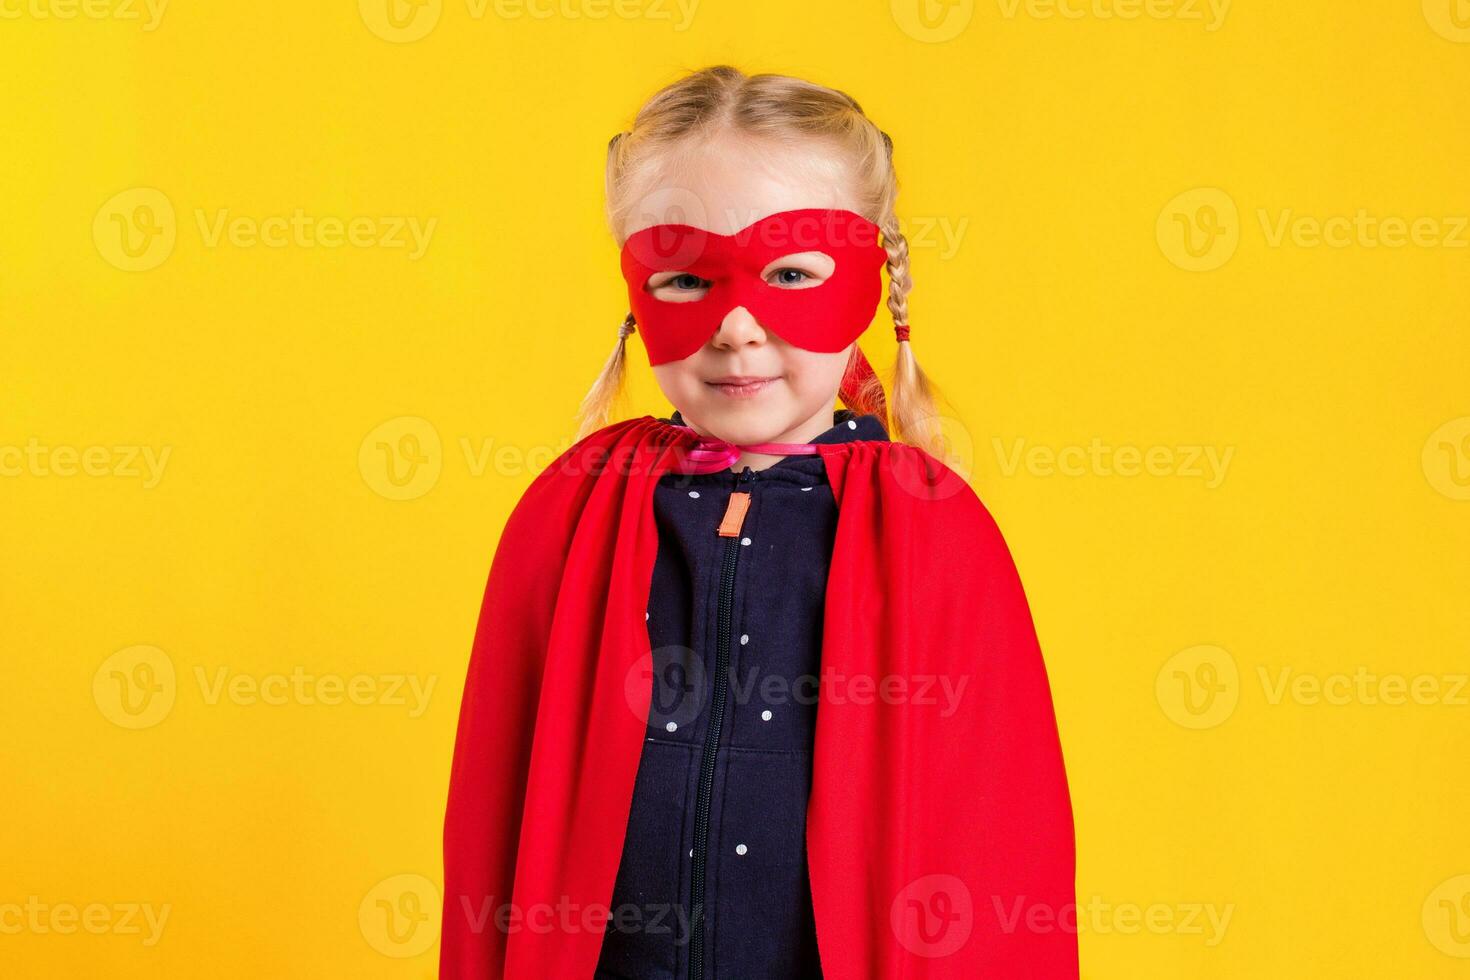 Funny little power superhero child girl in a red raincoat and a mask. Superhero concept. photo